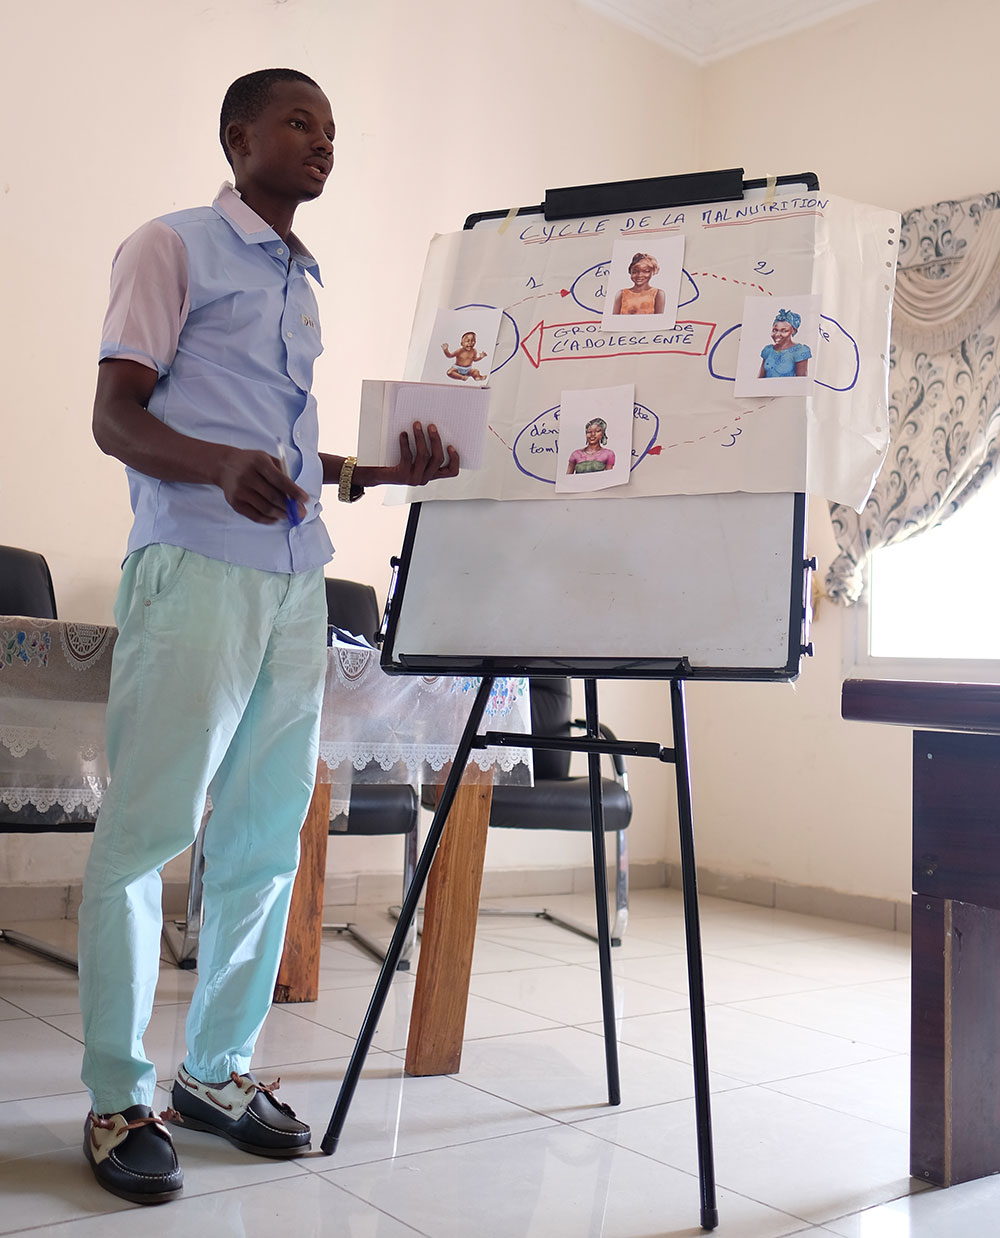 A participant, Diallo, examines how to break the cycle of malnutrition.